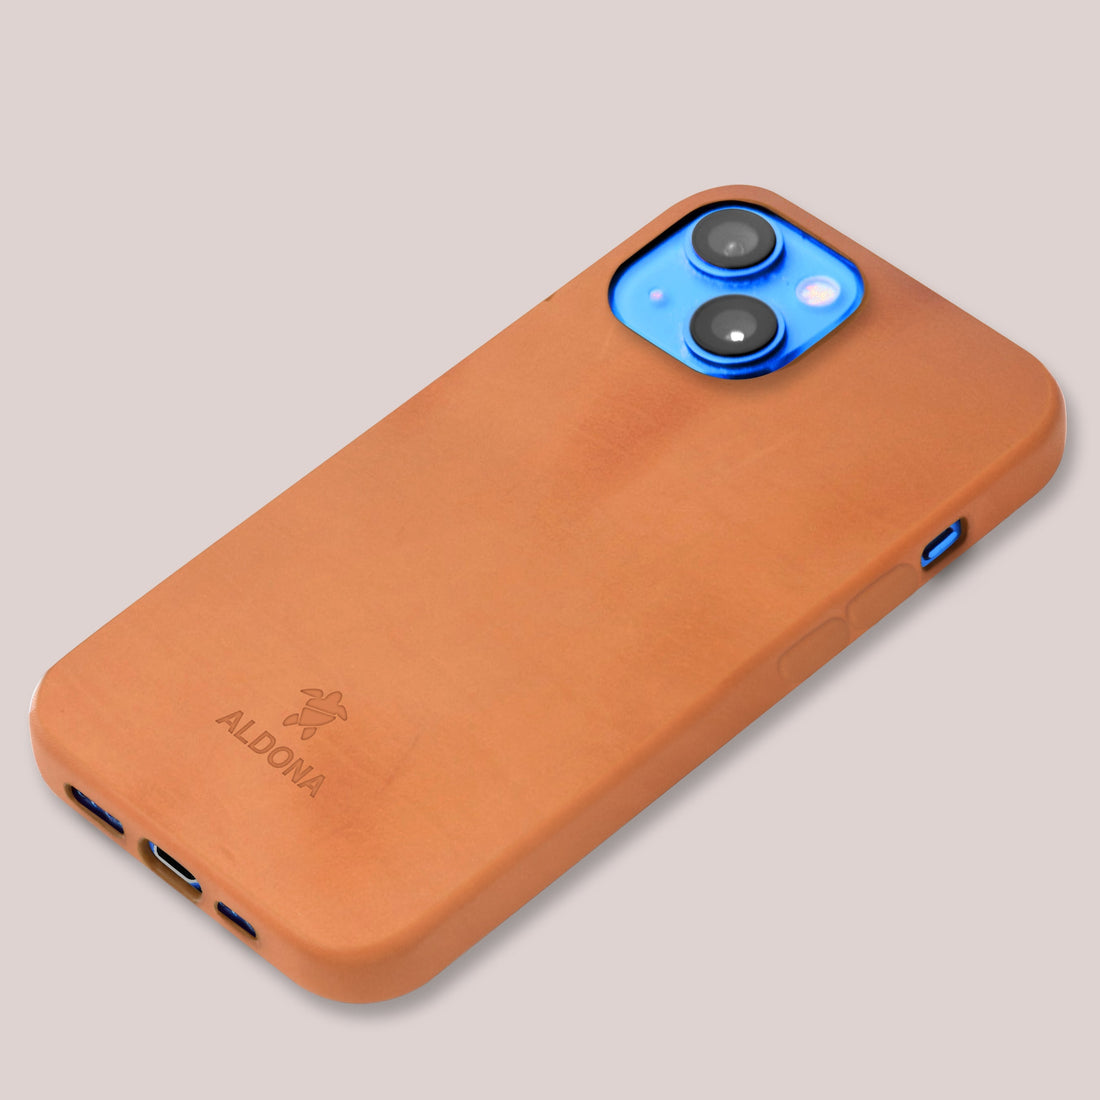 Kalon Case for iPhone 12 series with MagSafe Compatibility - Burnt Tobacco